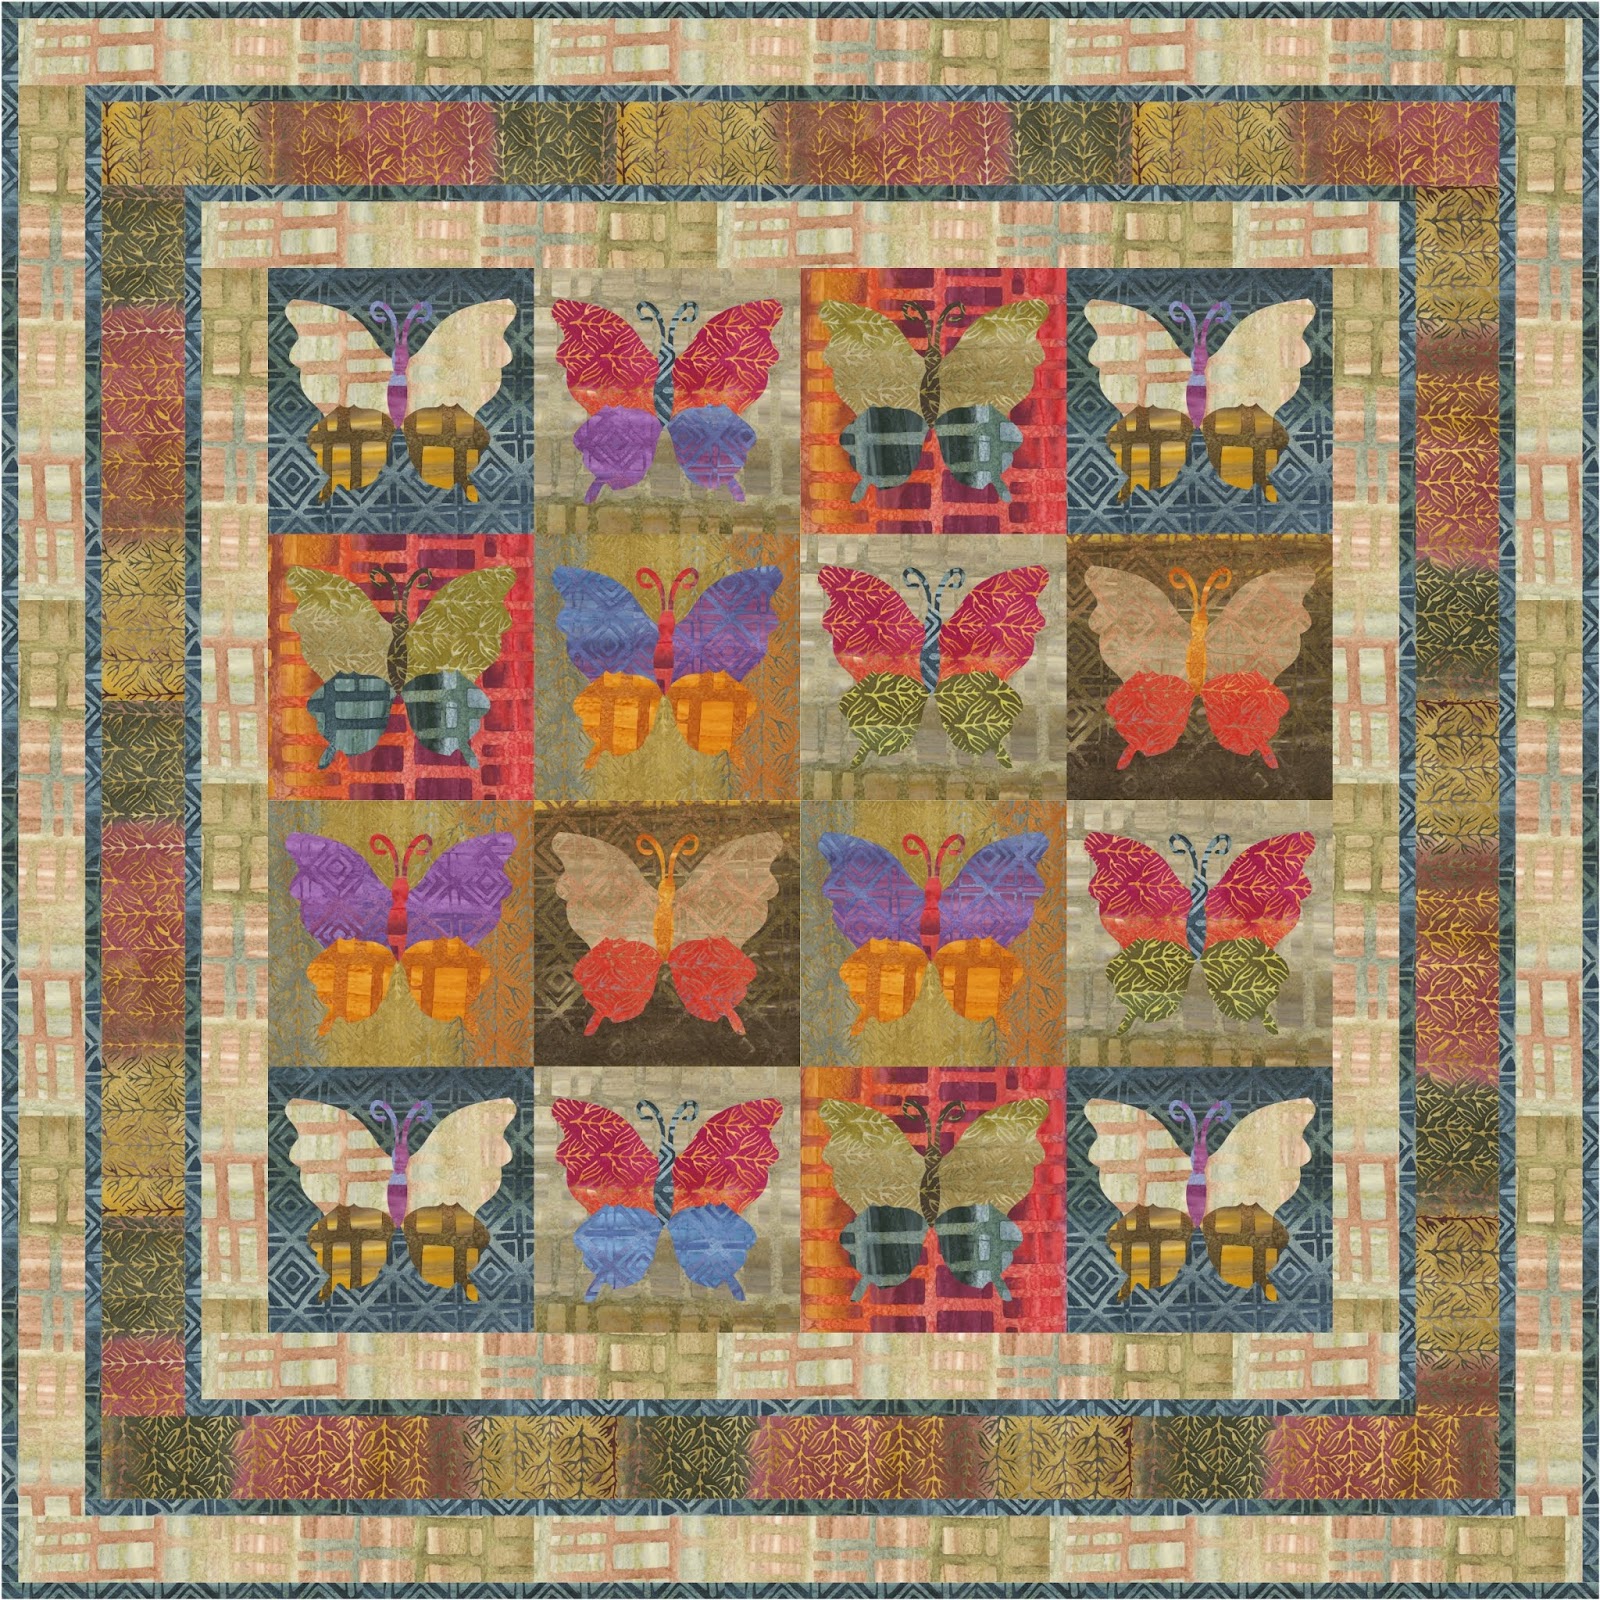 applique-quilt-pattern-with-butterflies-cool-wall-hanging-pieced-brain